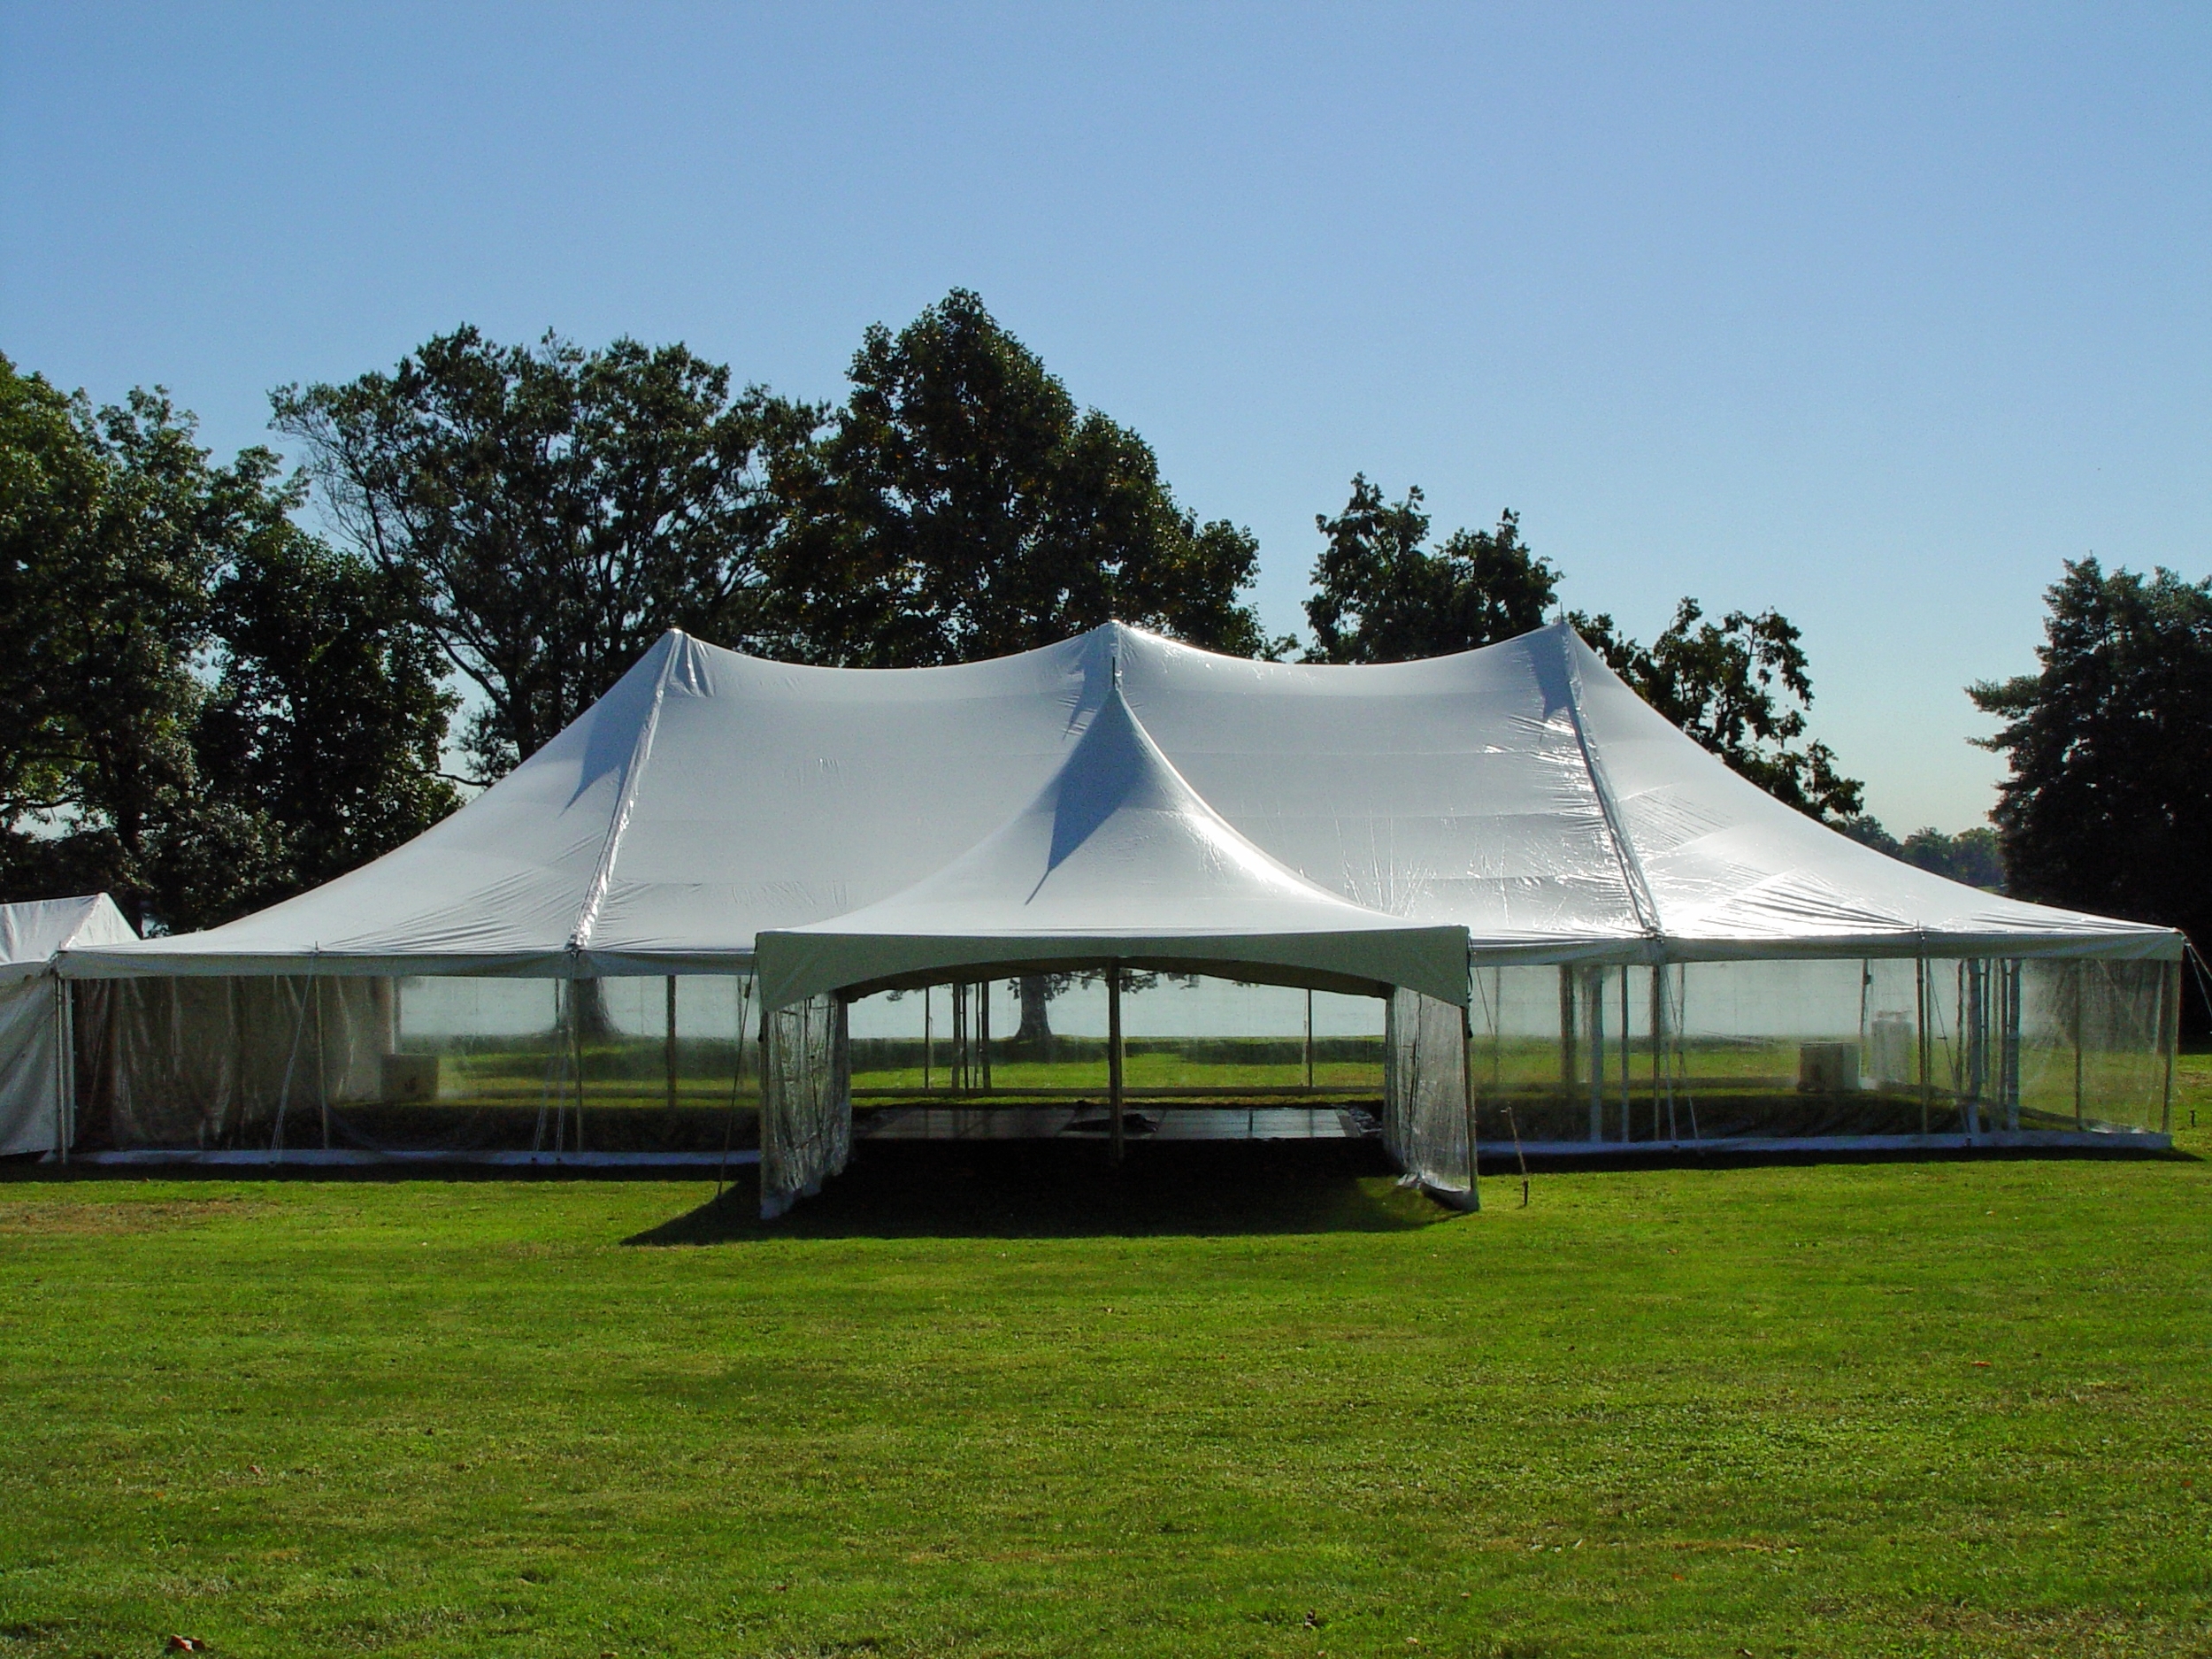 White tents with clear walls